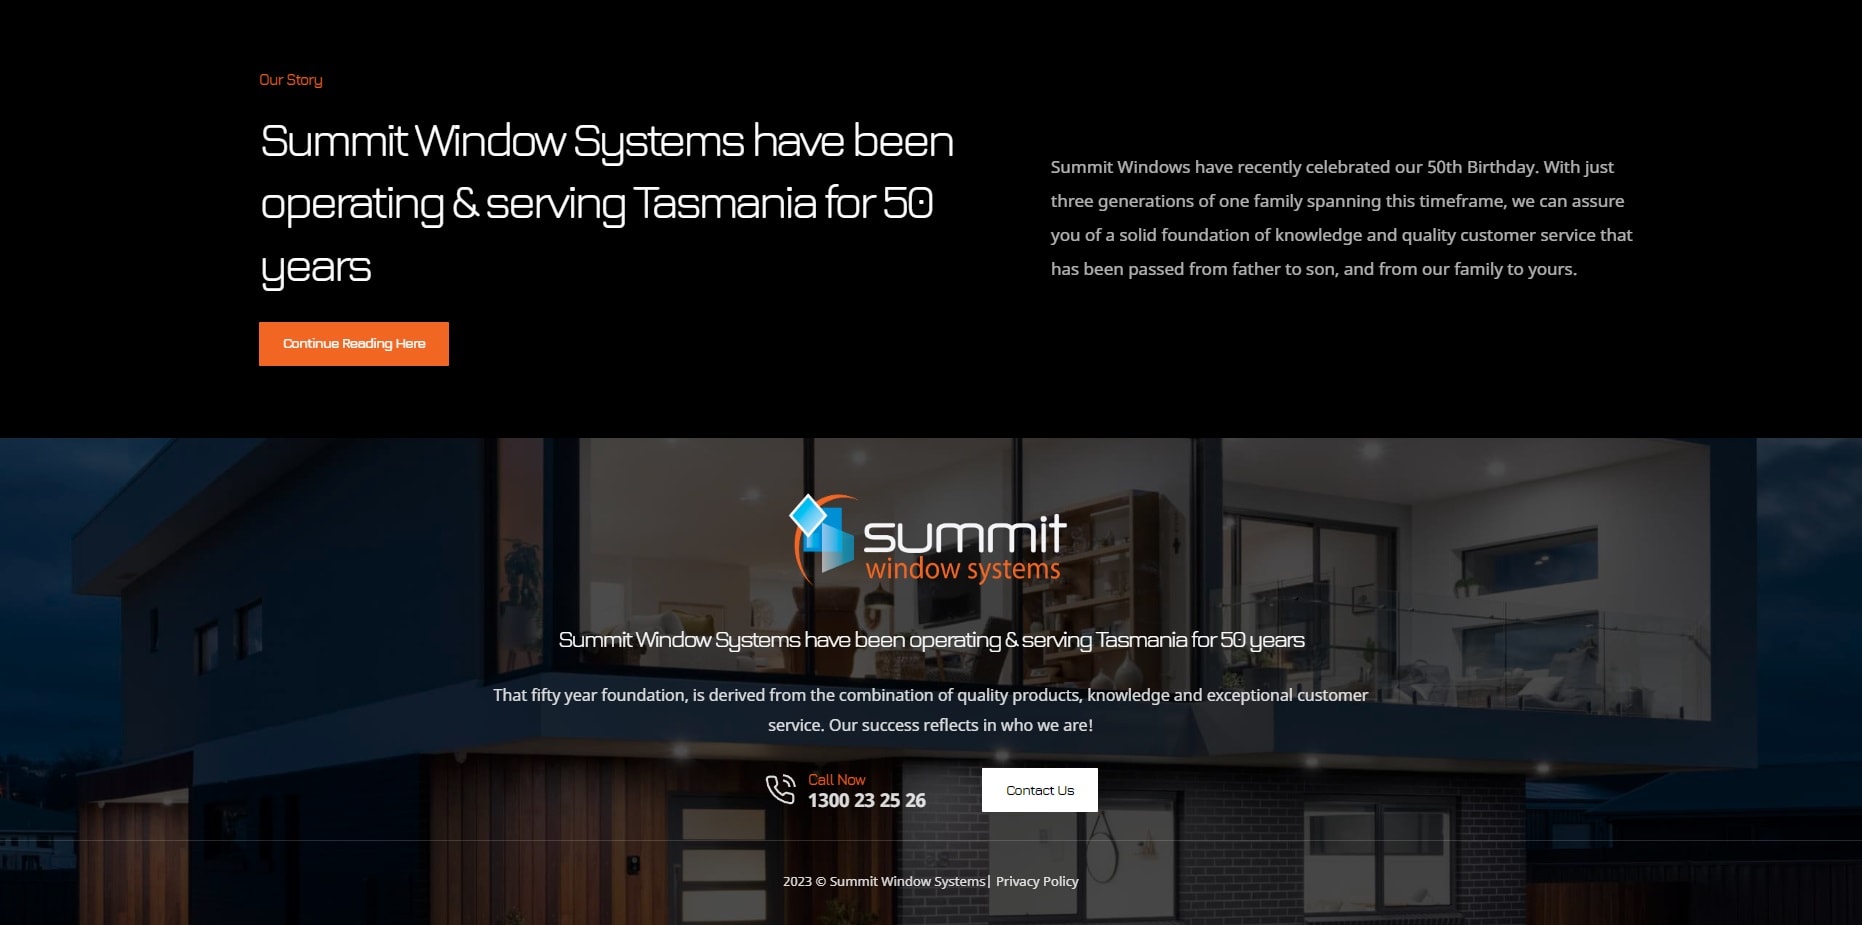 The website design for summit windows and doors.